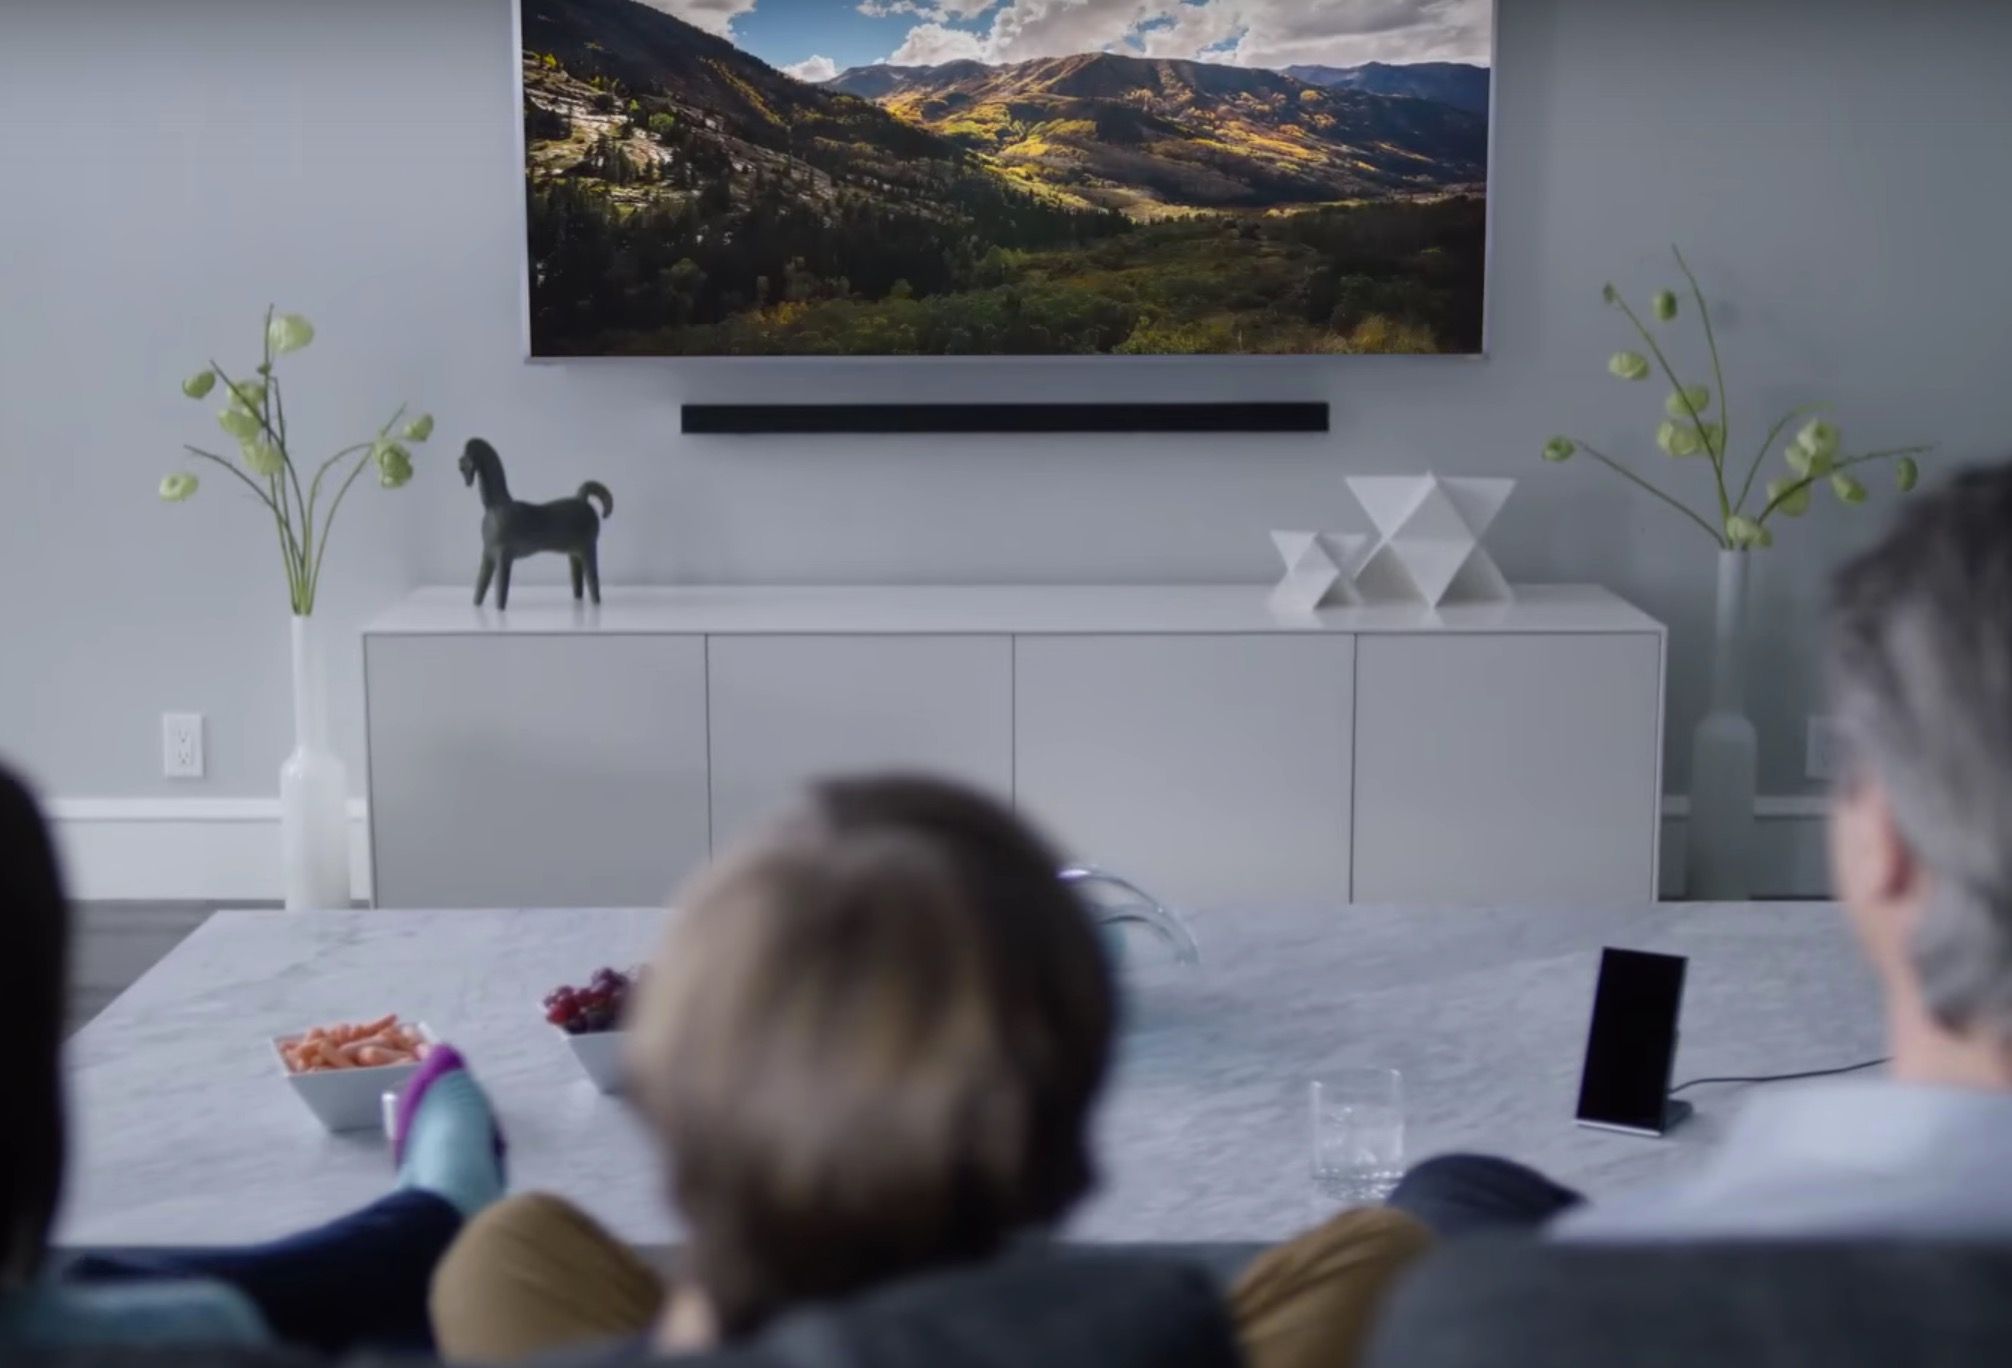 vizio s new tv and speaker lineup come with google cast and an android tablet image 1